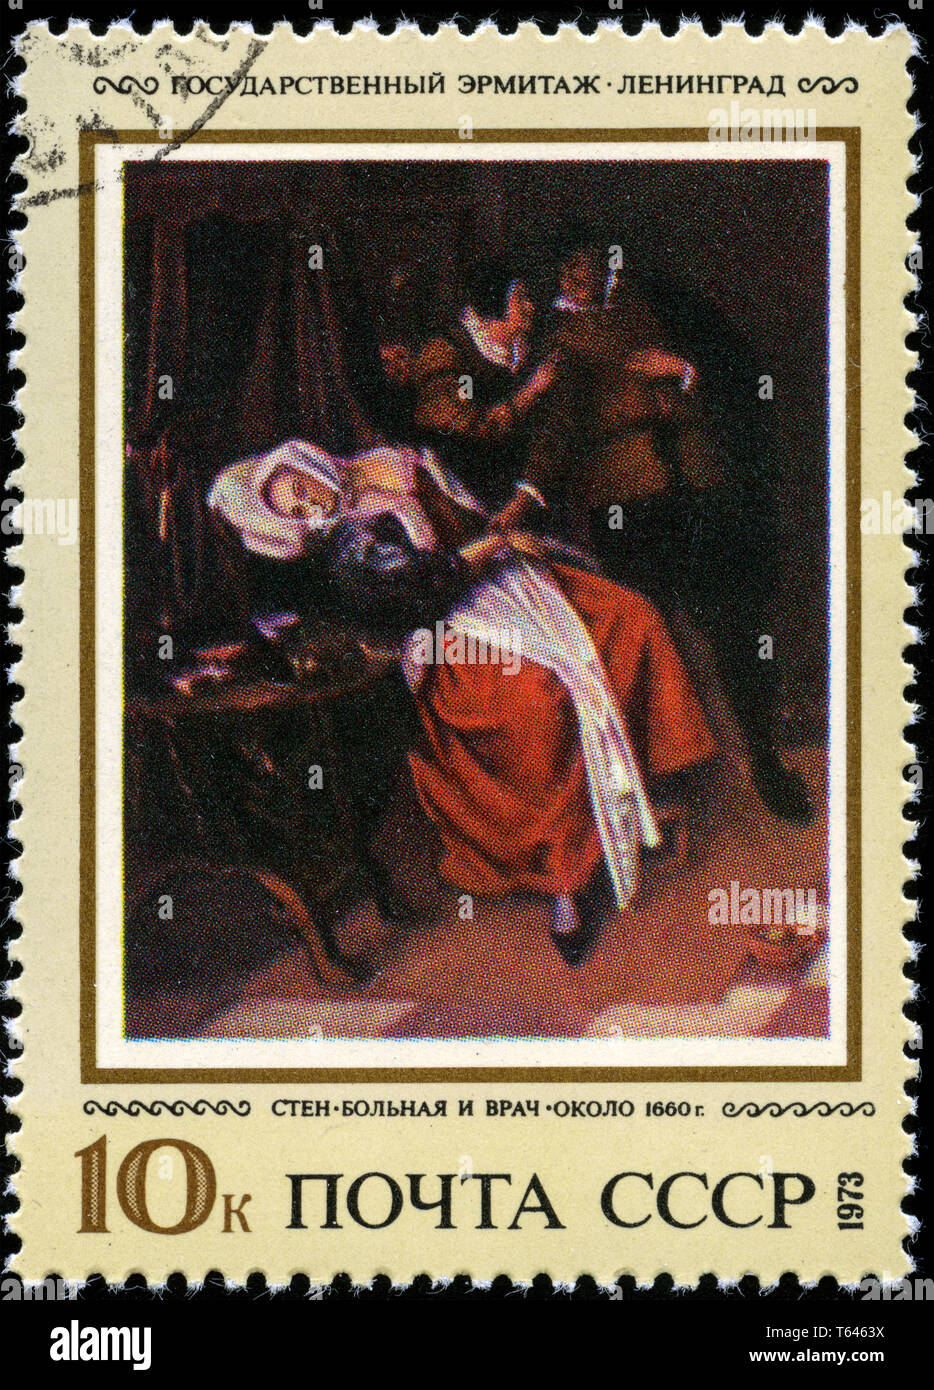 Postage stamp from the Soviet Union in the Foreign Paintings in Soviet Museums series issued in 1973 Stock Photo